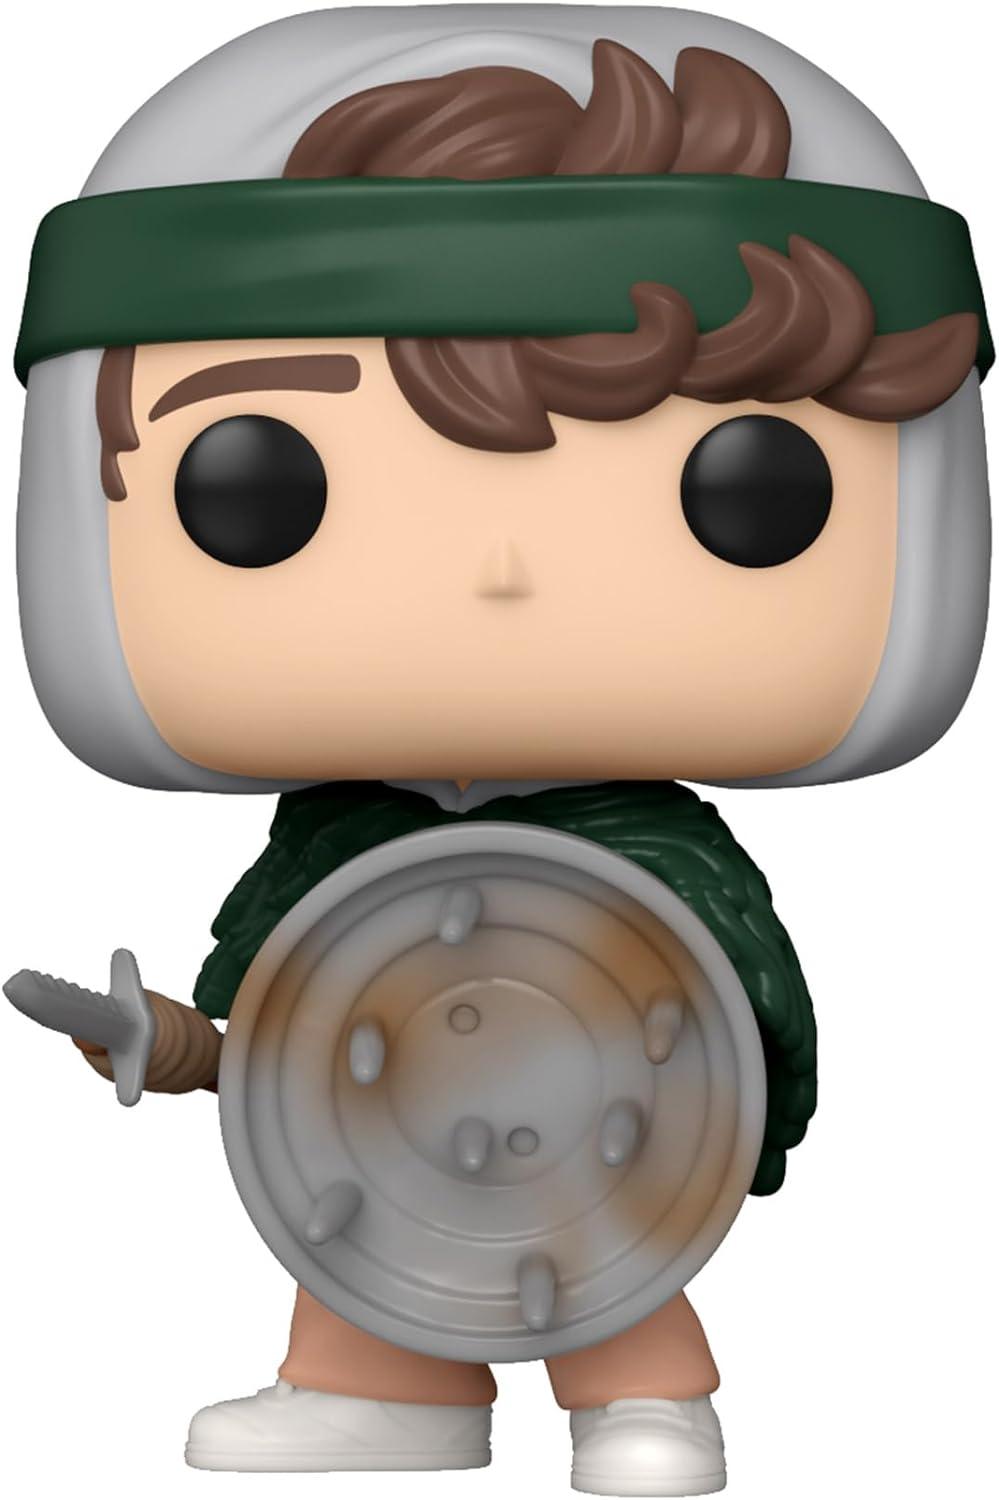 Funko Pop! Television Dustin with shield #1463 - STRANGER THINGS - Magic Dreams Store